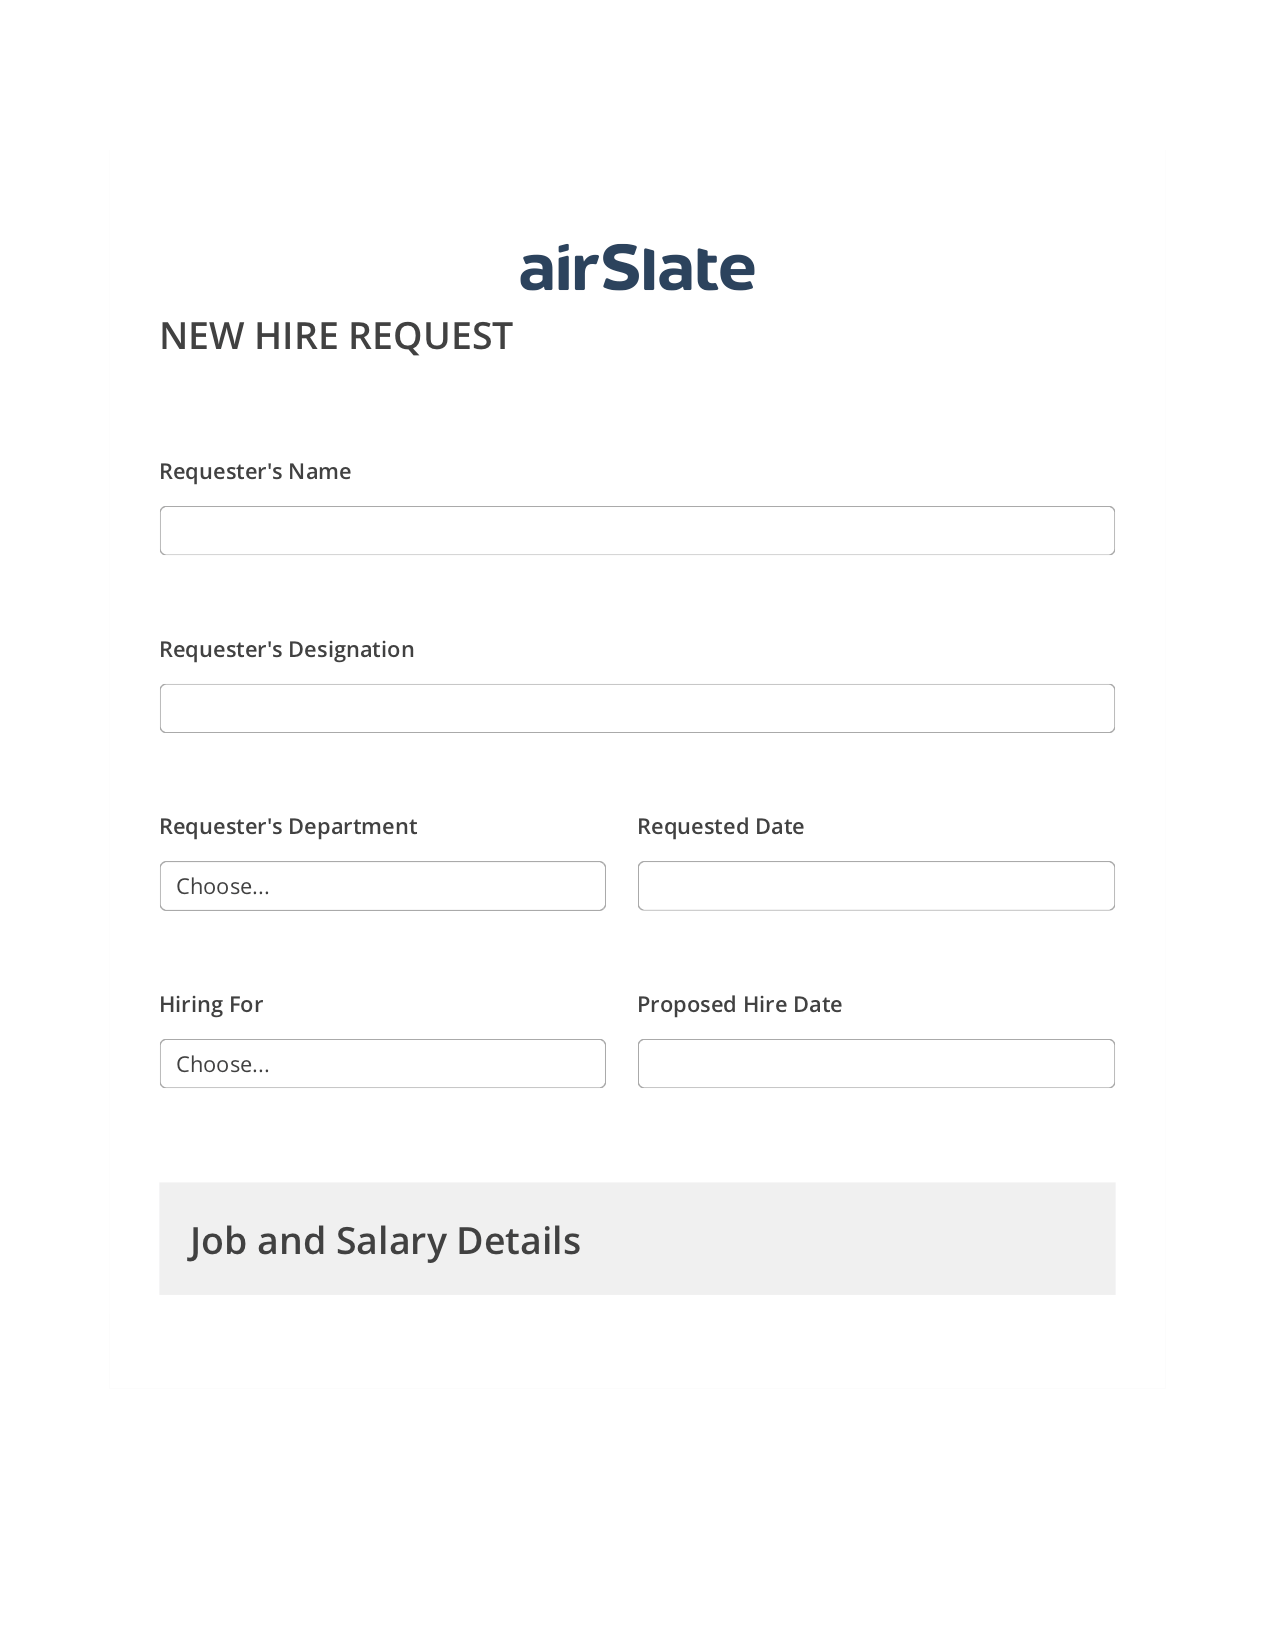 Hiring Request Workflow Pre-fill from another Slate Bot, Create slate bot, Export to Google Sheet Bot